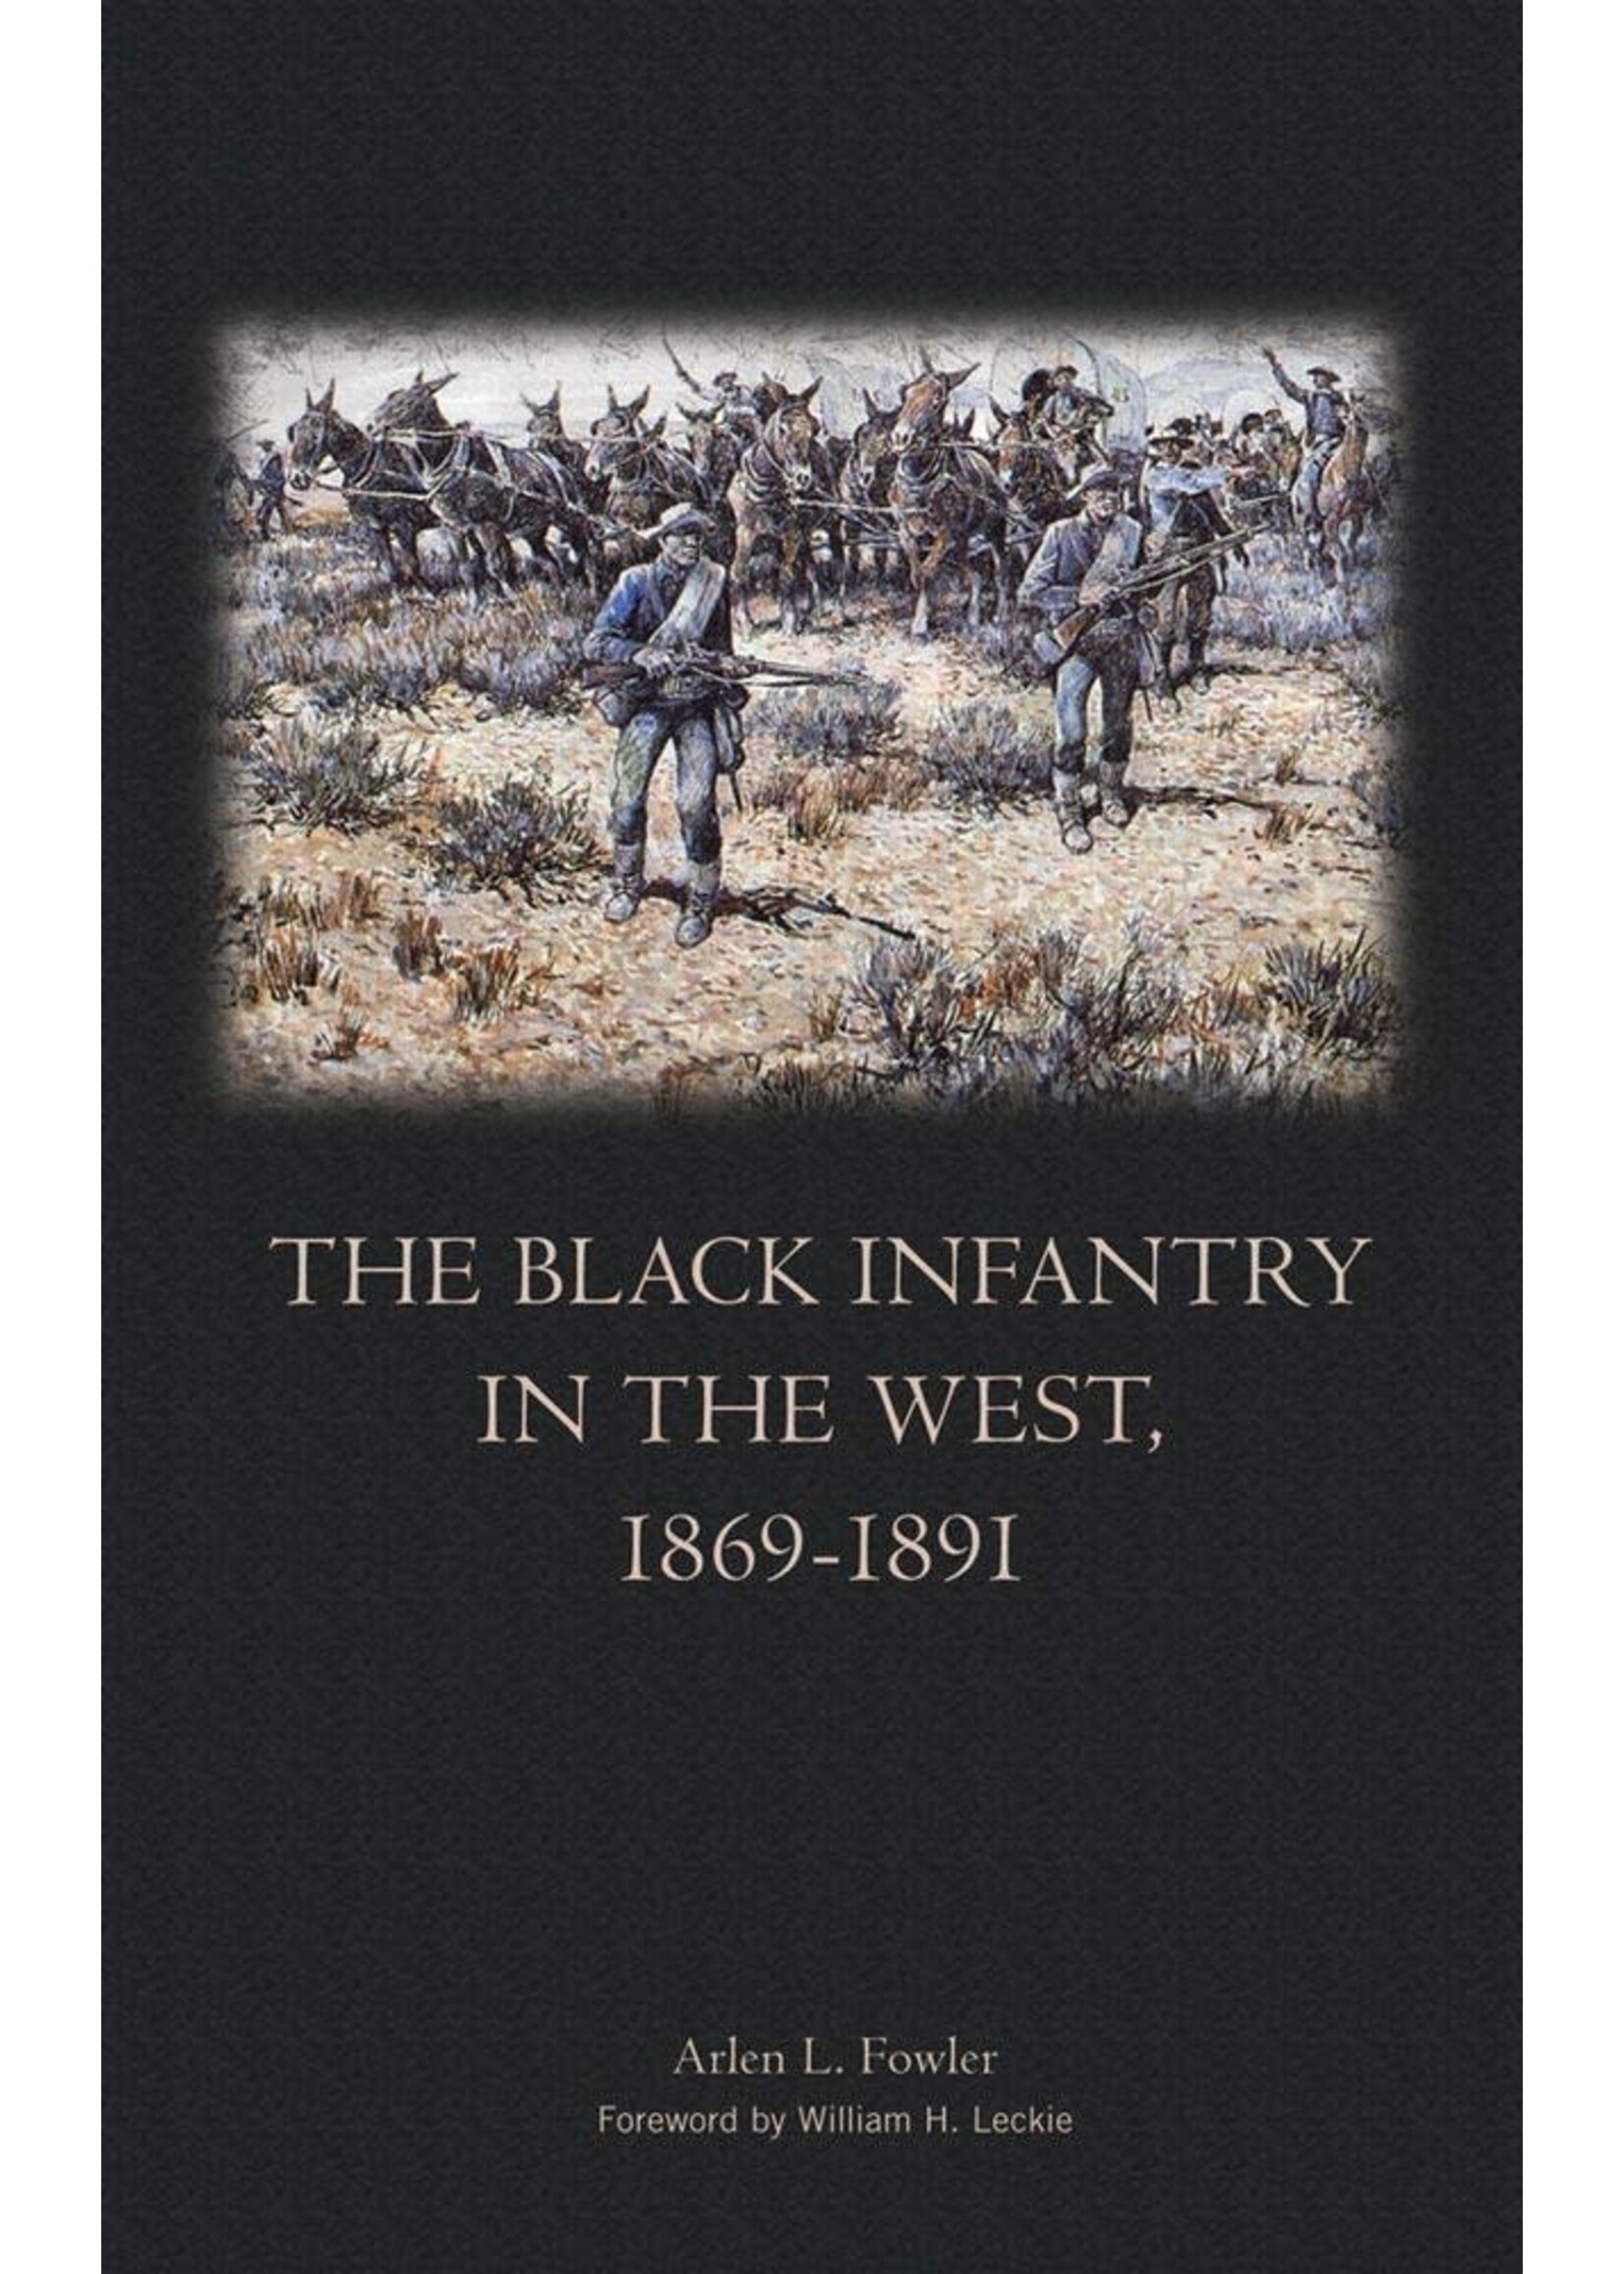 The Black Infantry in the West, 1869-1891